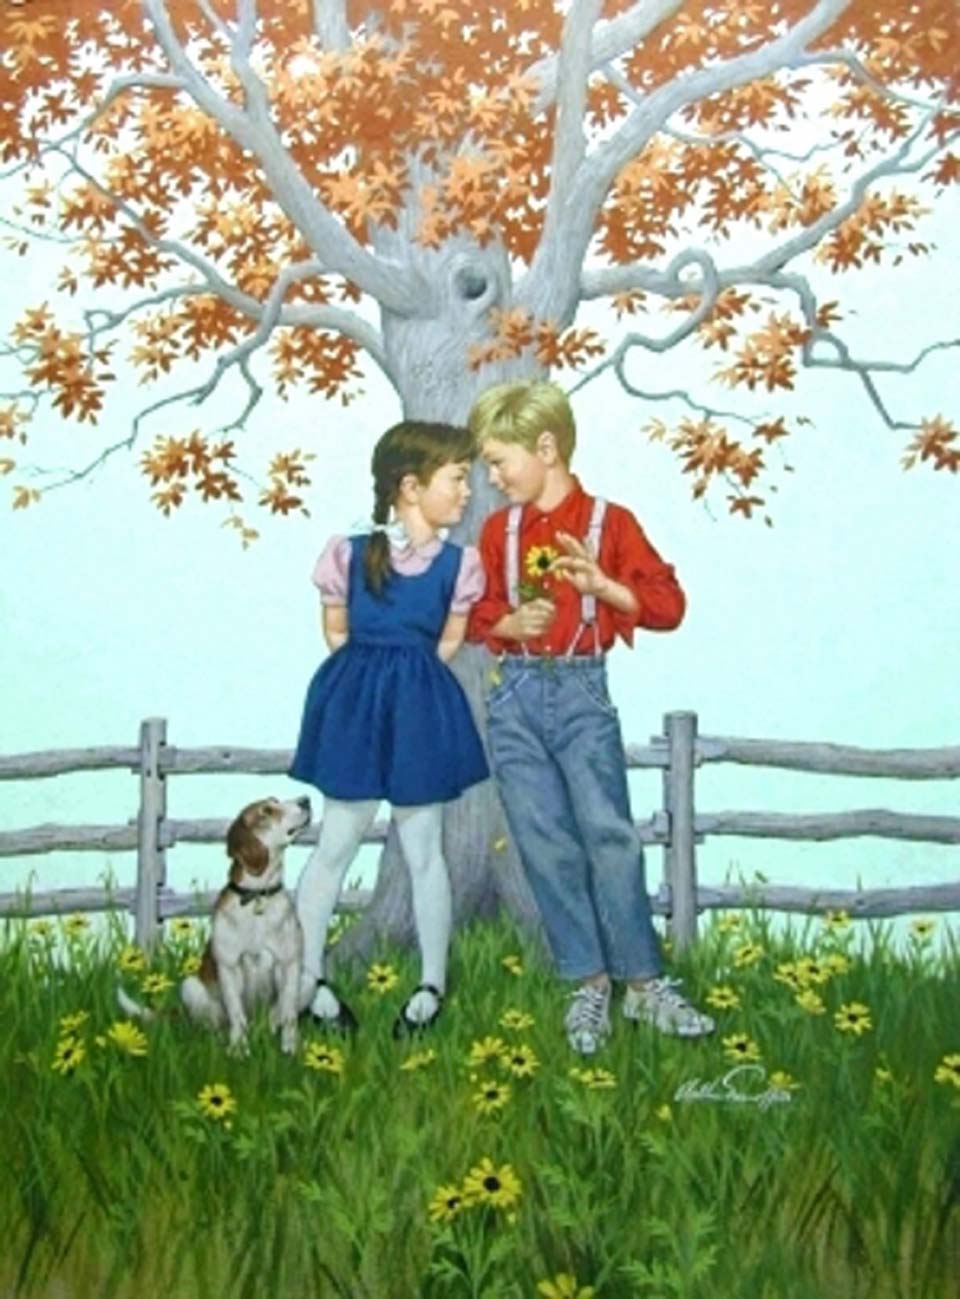 Kids and dog under tree